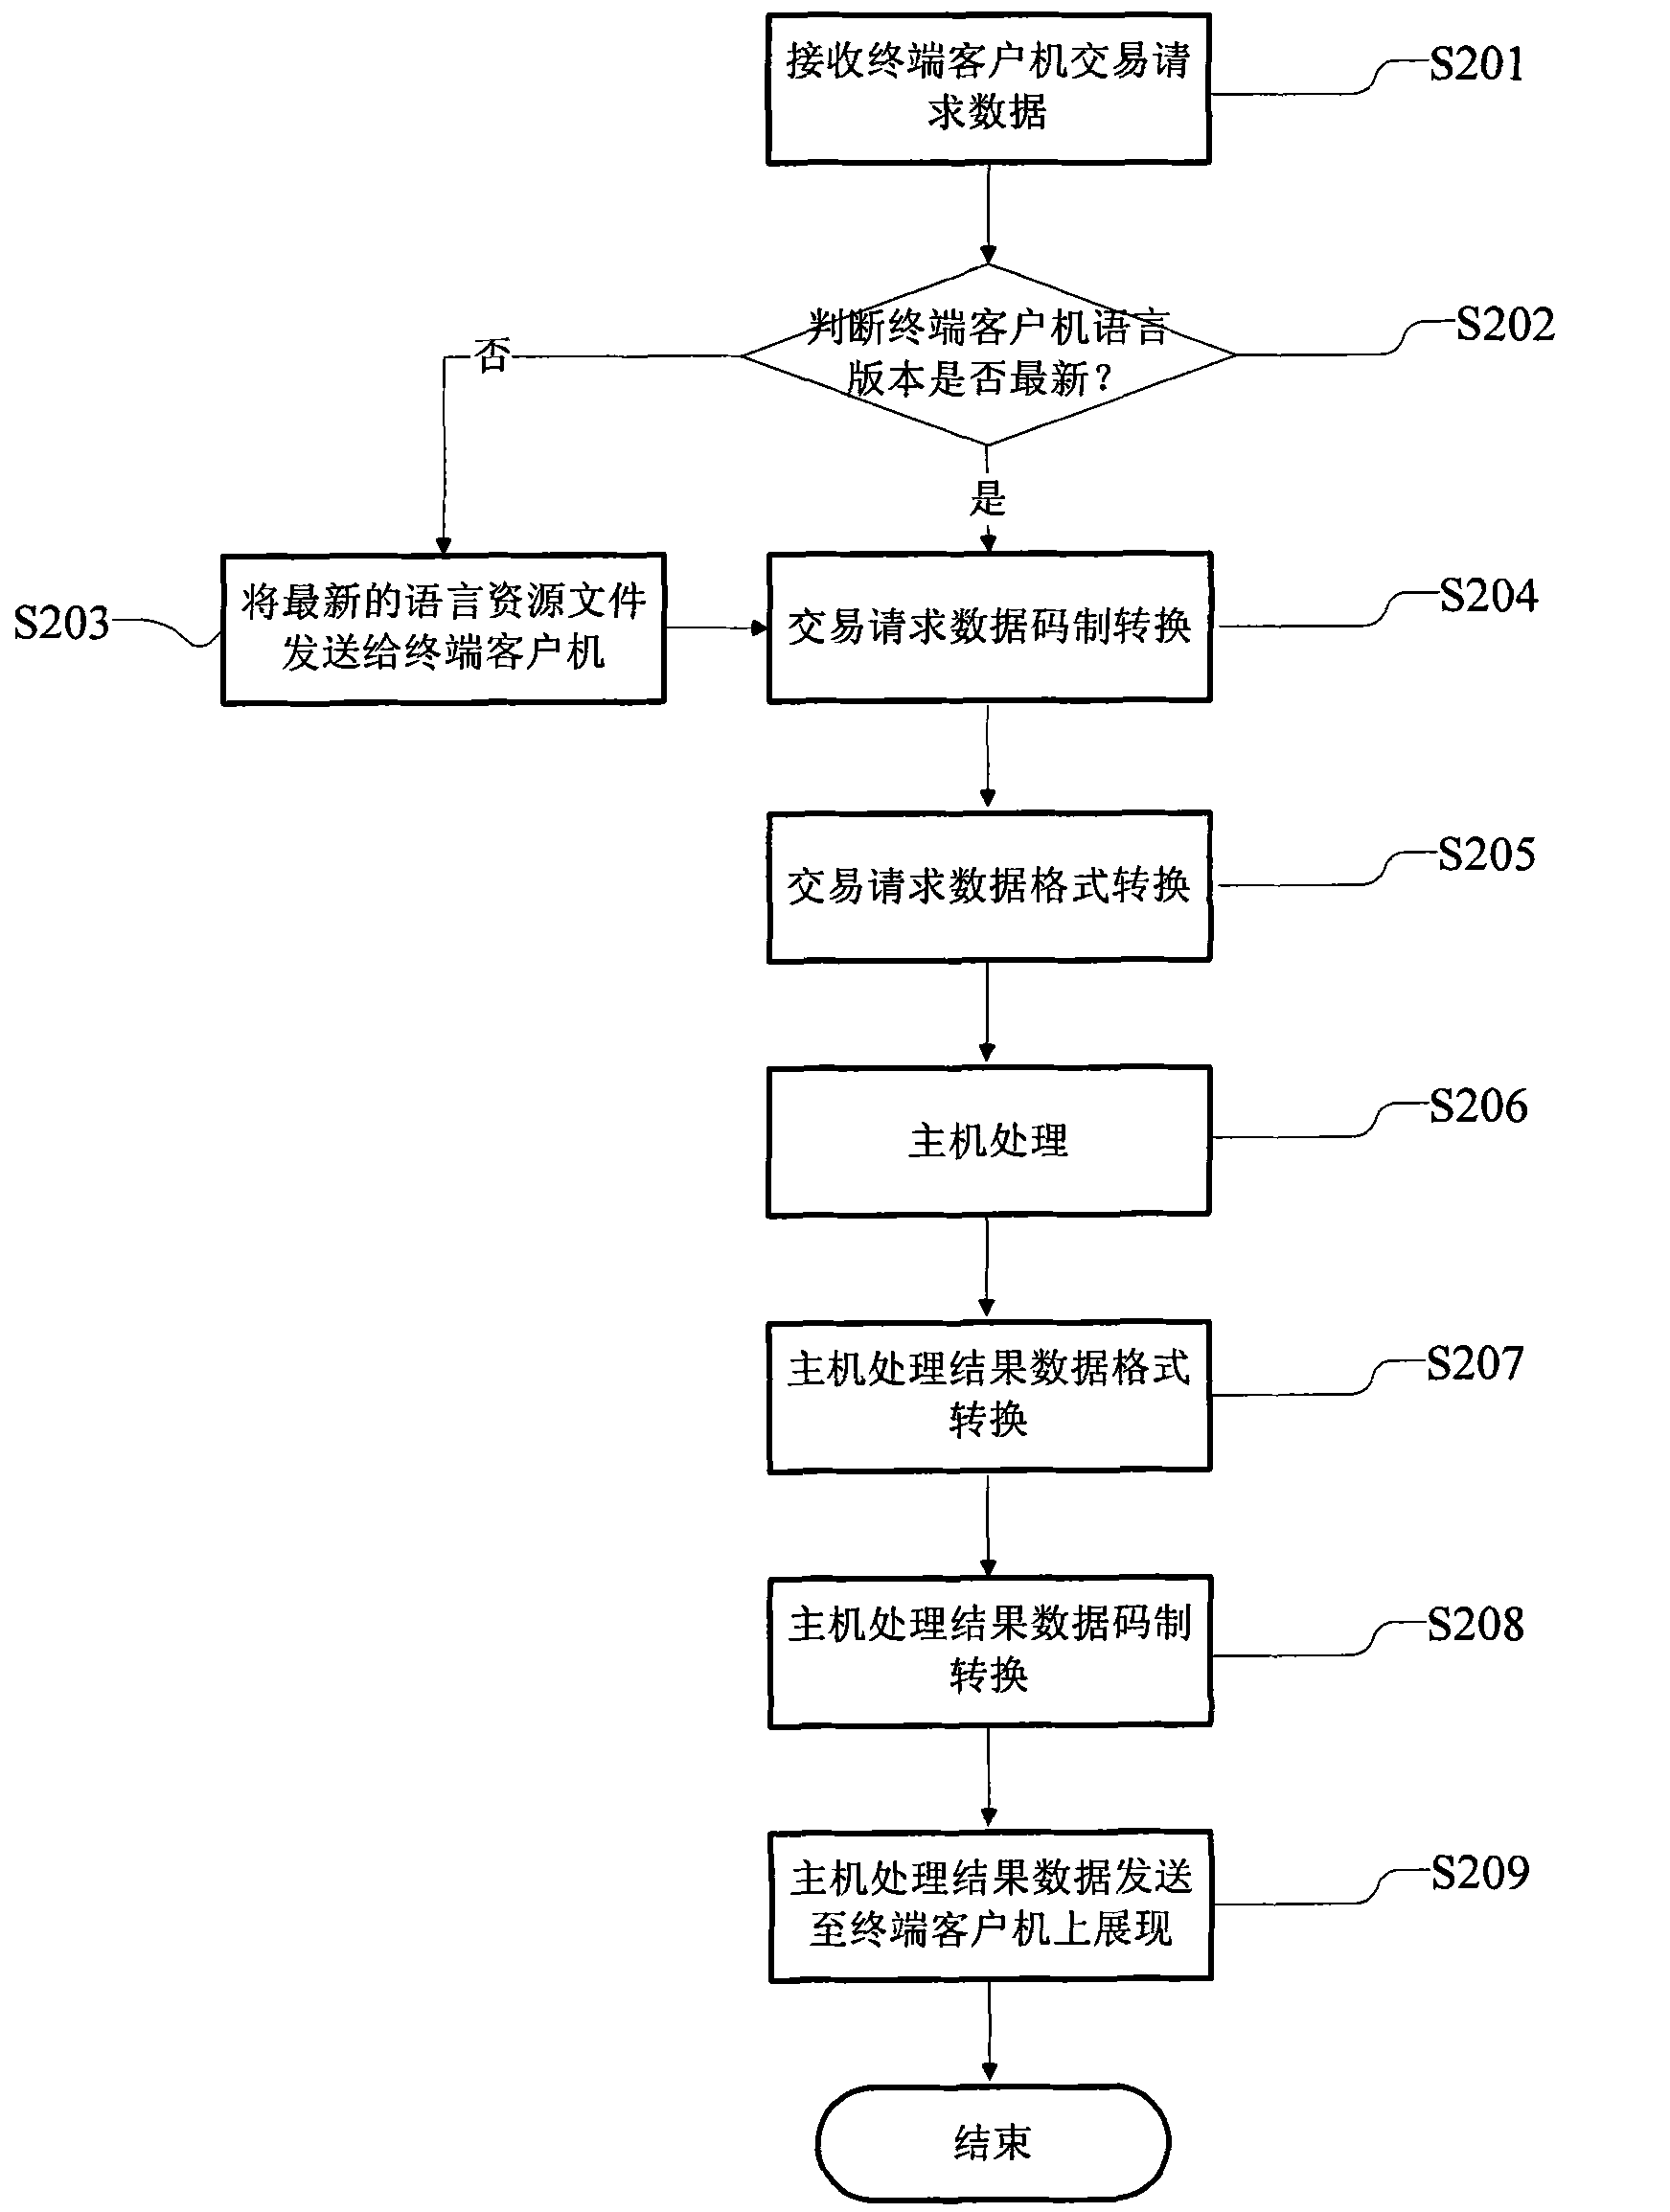 Multilanguage-supporting data conversion equipment and bank transaction system